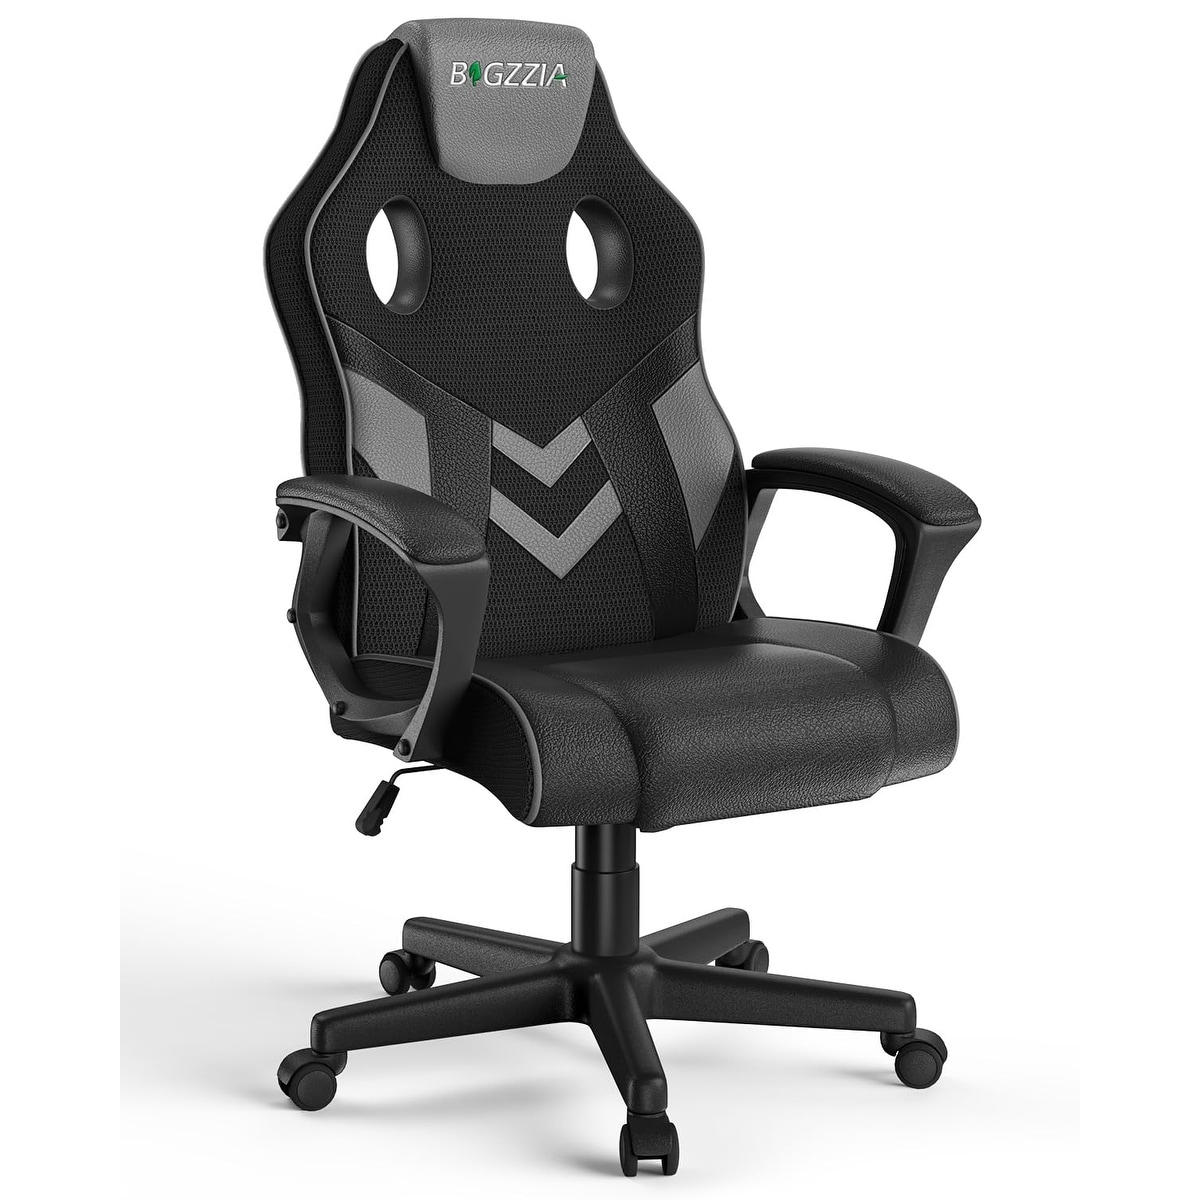 https://ak1.ostkcdn.com/images/products/is/images/direct/44a59187f0d8c55ceb8a44101af841a2555d433b/Ergonomic-Gaming-Chair-Height-Adjustable-360%C2%B0-Swivel-Chair-with-Headrest-for-Home%26Office.jpg